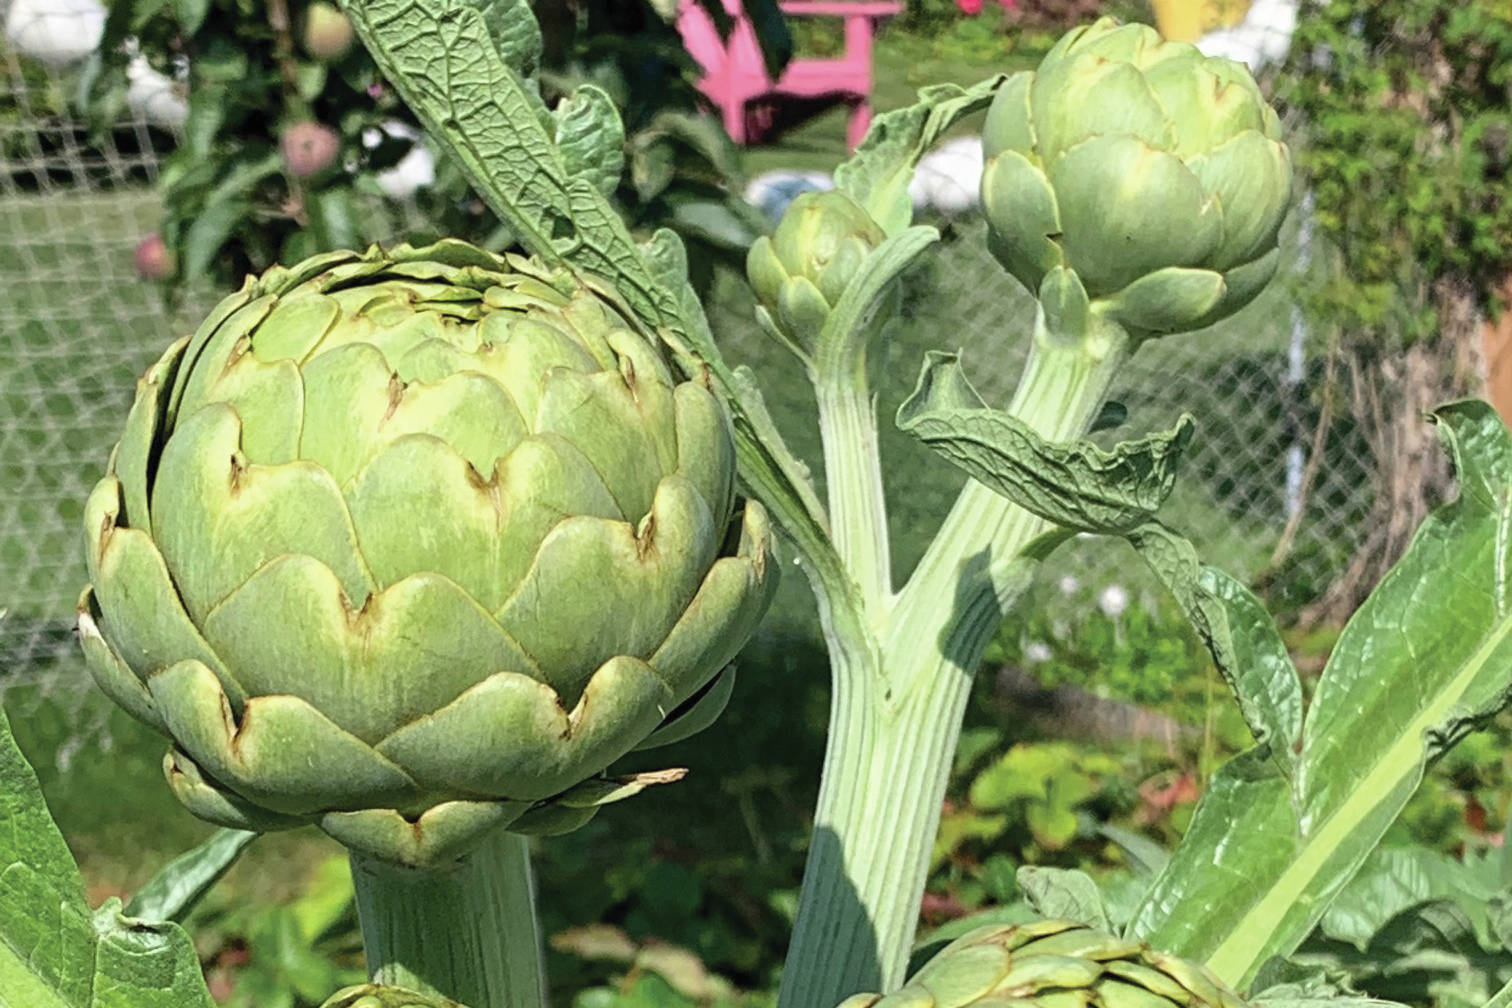 Green Globe artichokes thriving and soon to be harvested on Sunday, Aug. 11, 2019, in the Kachemak Gardener’s home in Homer, Alaska. (Photo by Rosemary Fitzpatrick)